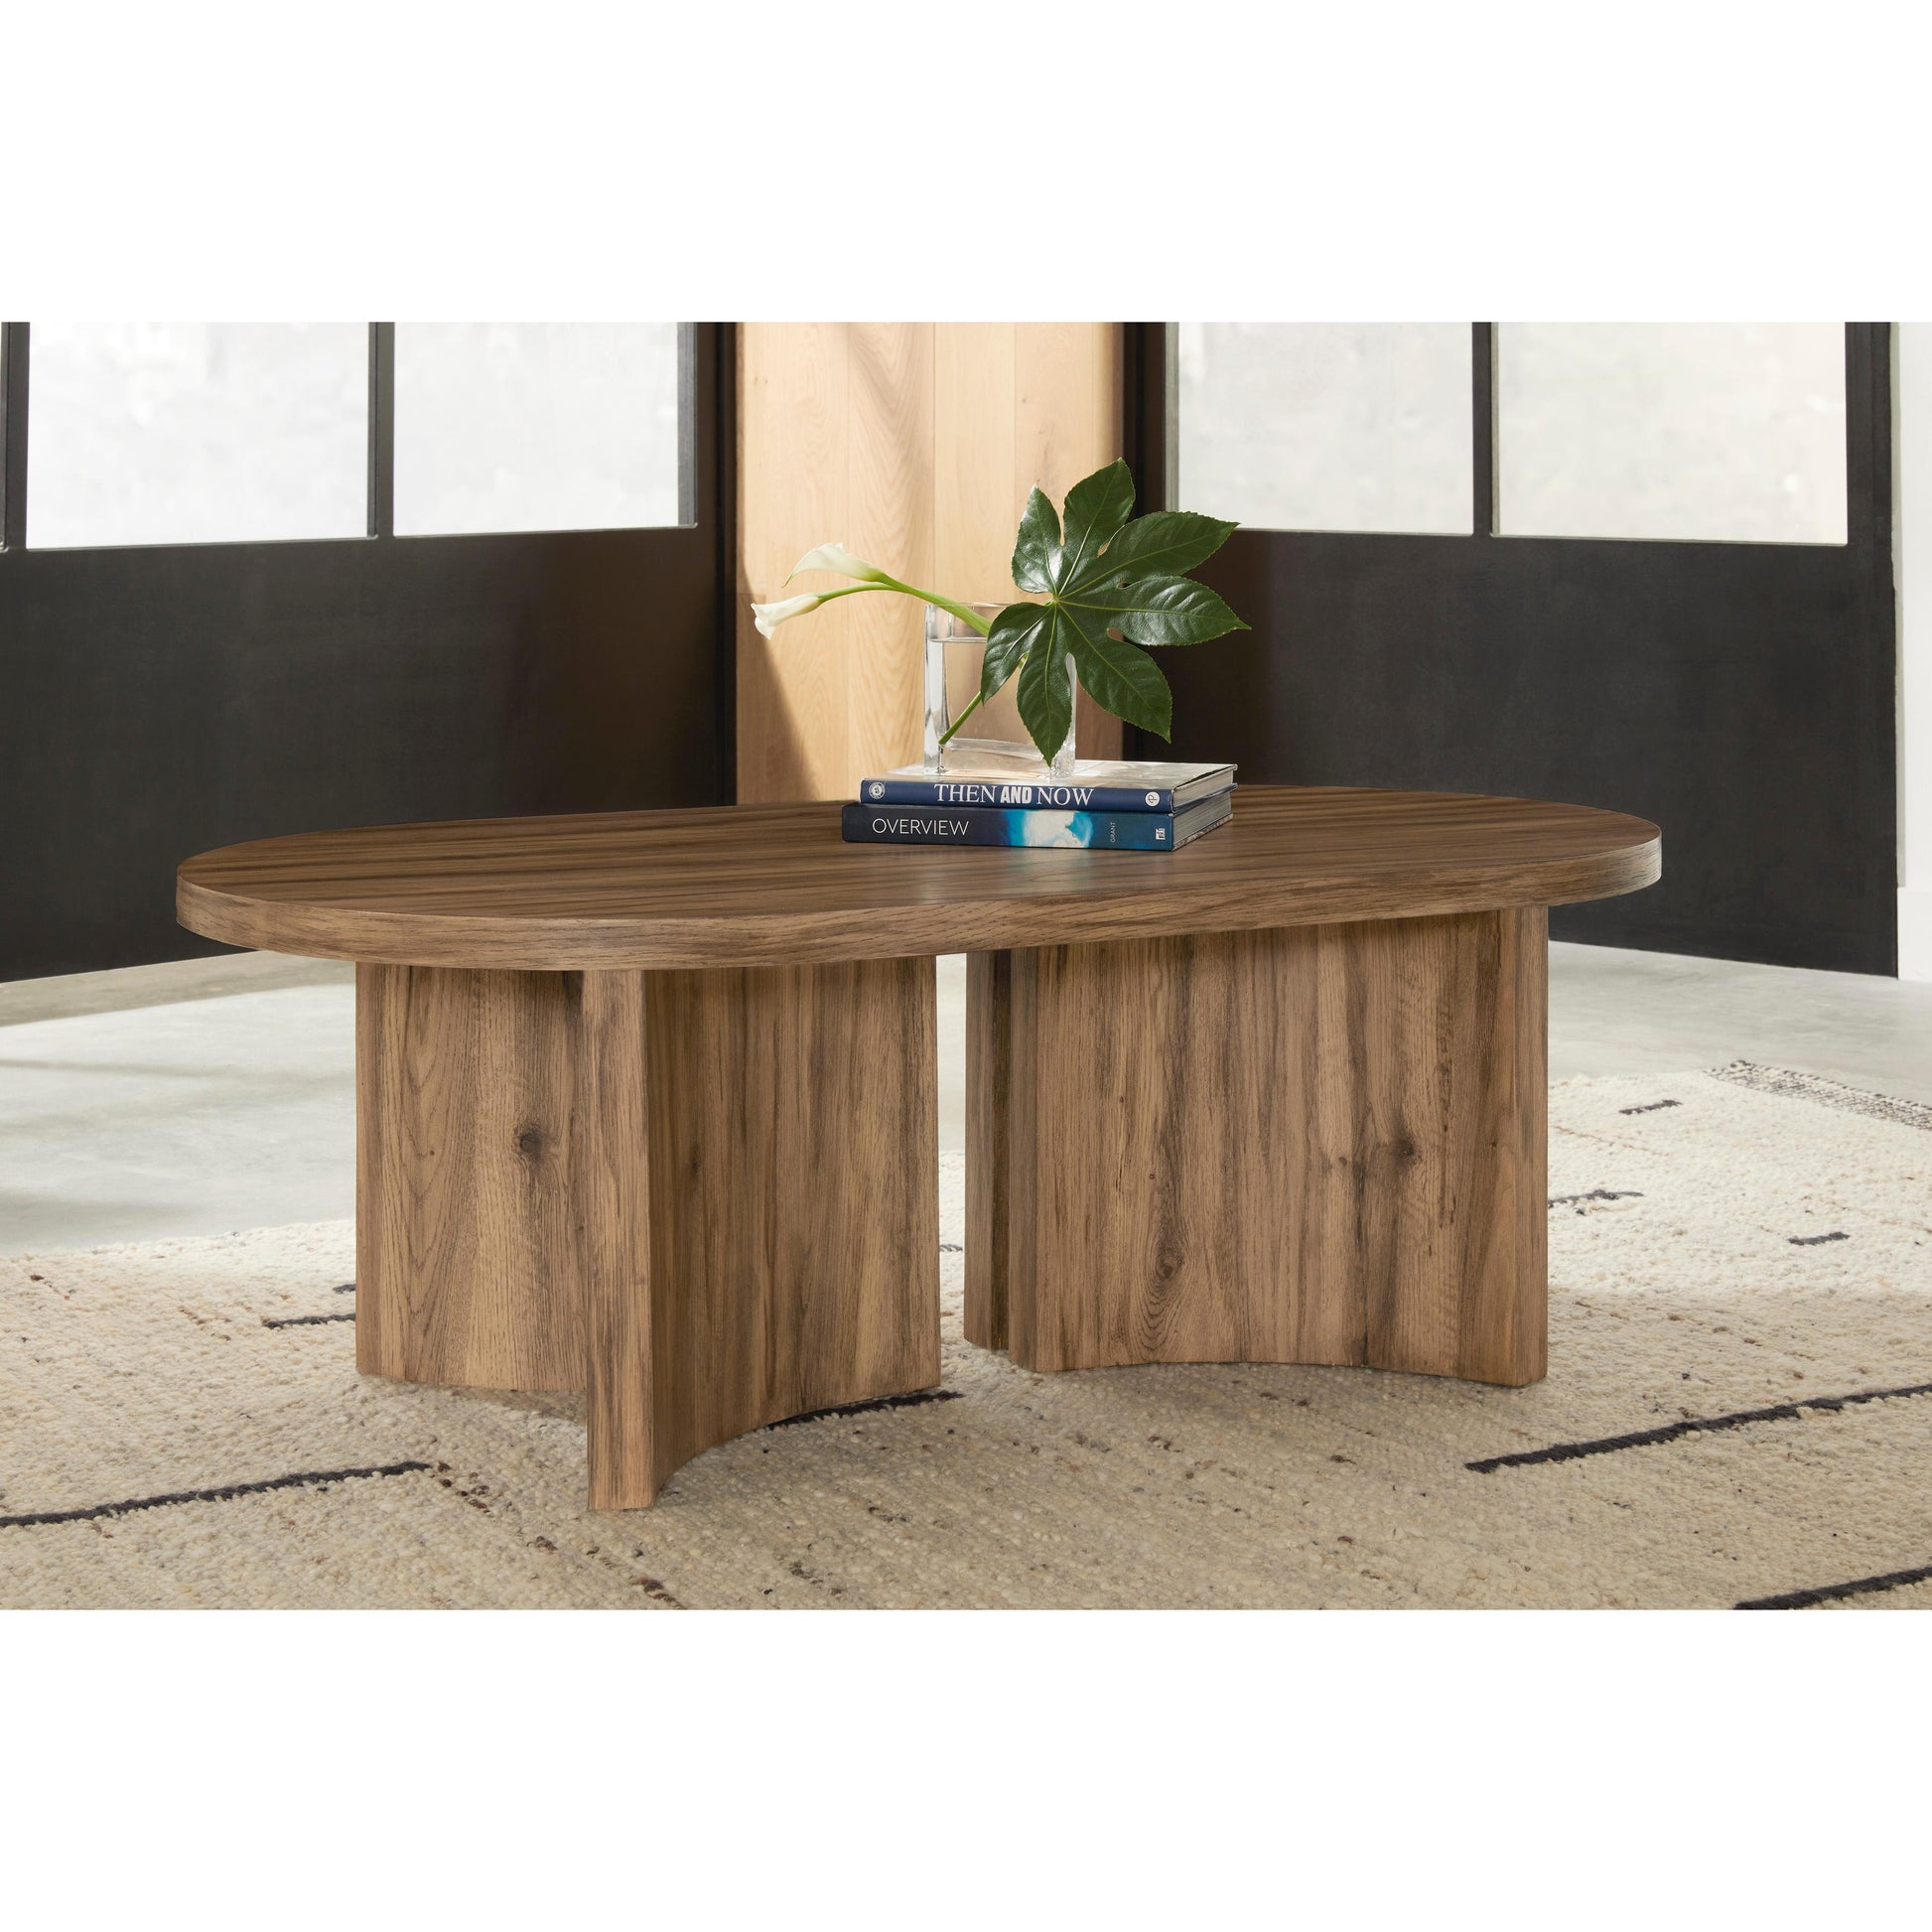 Signature Design by Ashley Austanny Occasional Table Set T683-0/T683-6/T683-6 IMAGE 2